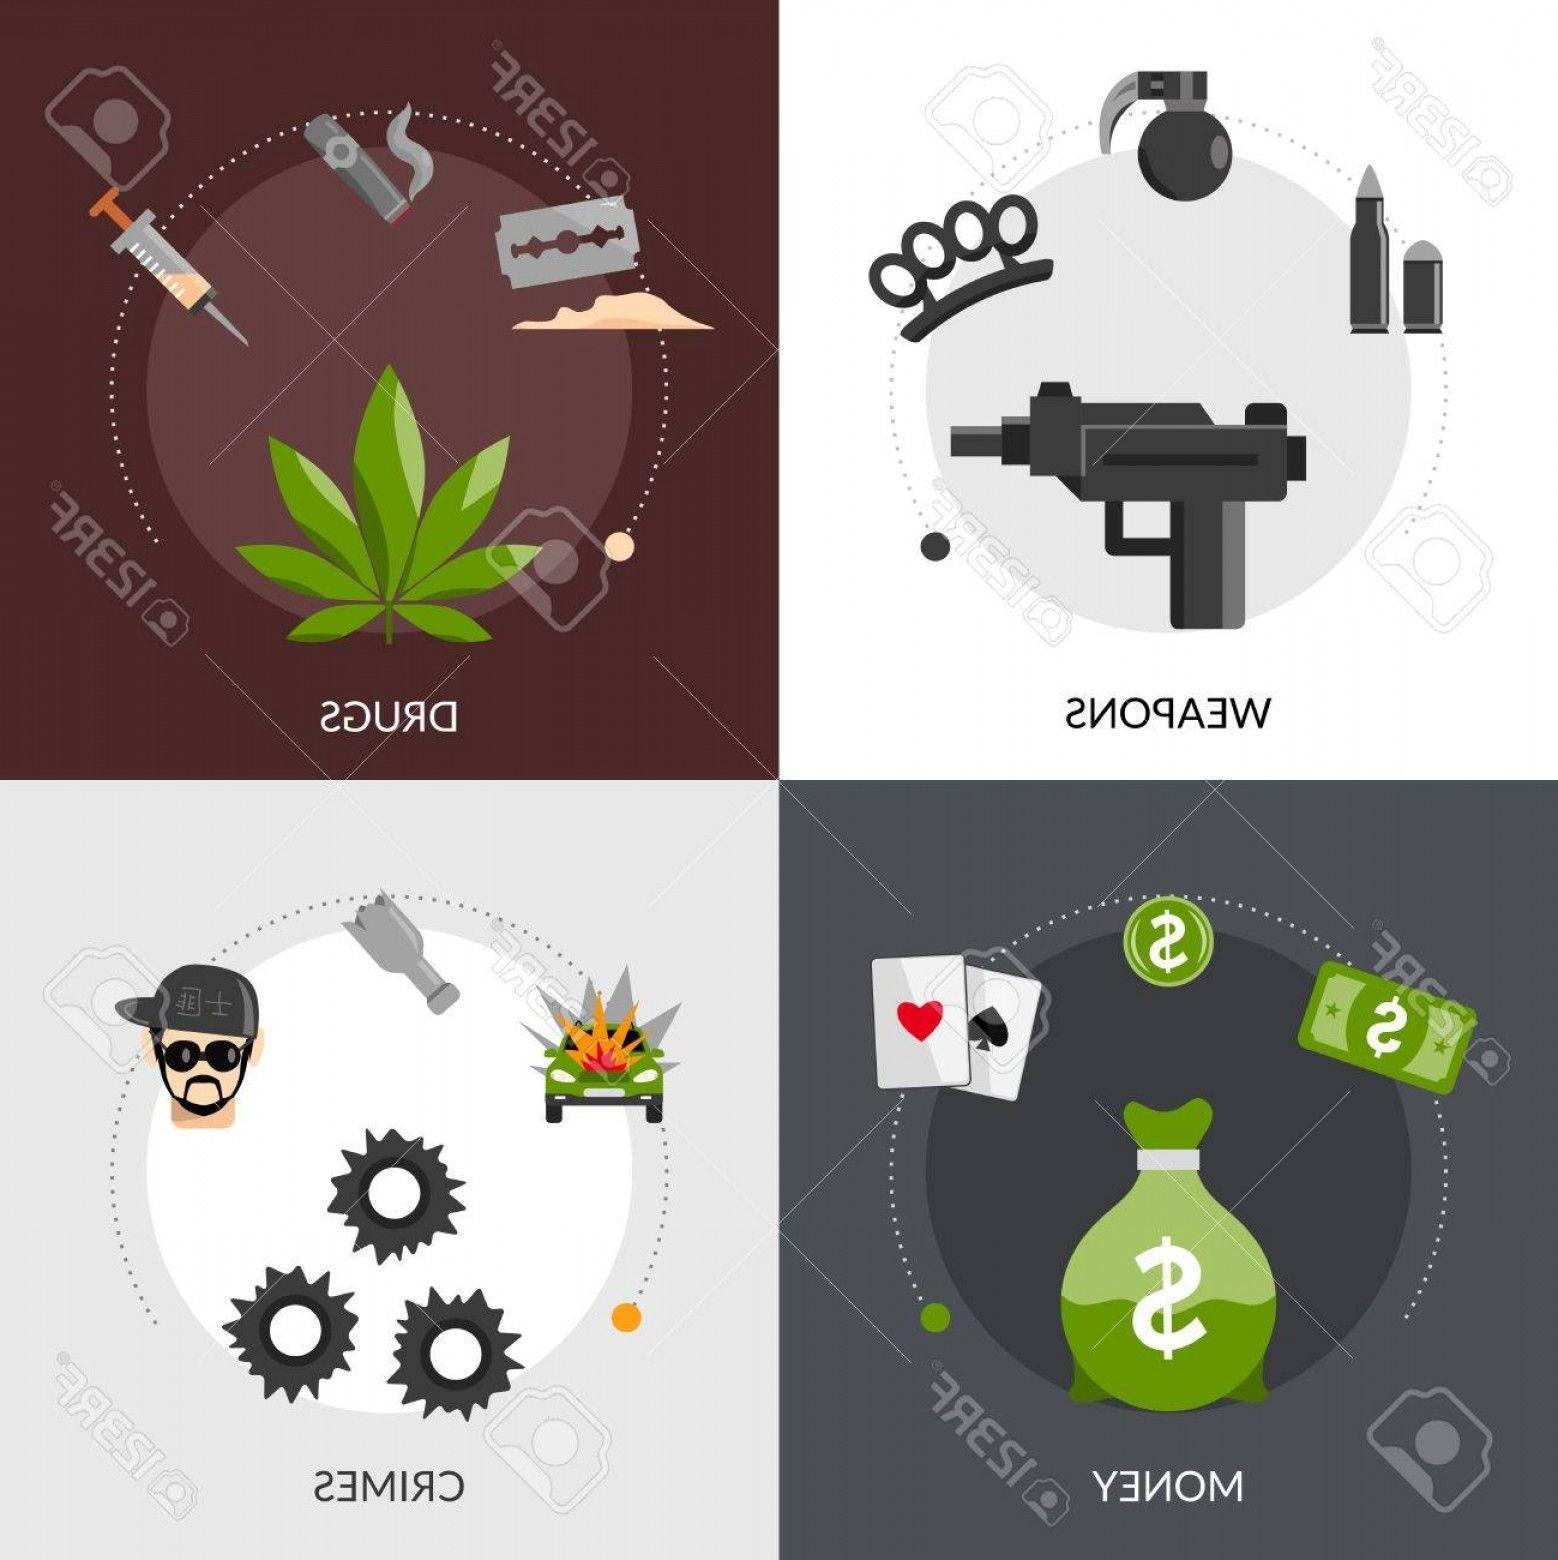 Gangster Money Logo - Photostock Vector Gangster Flat Icon Composition Of Weapons Drugs